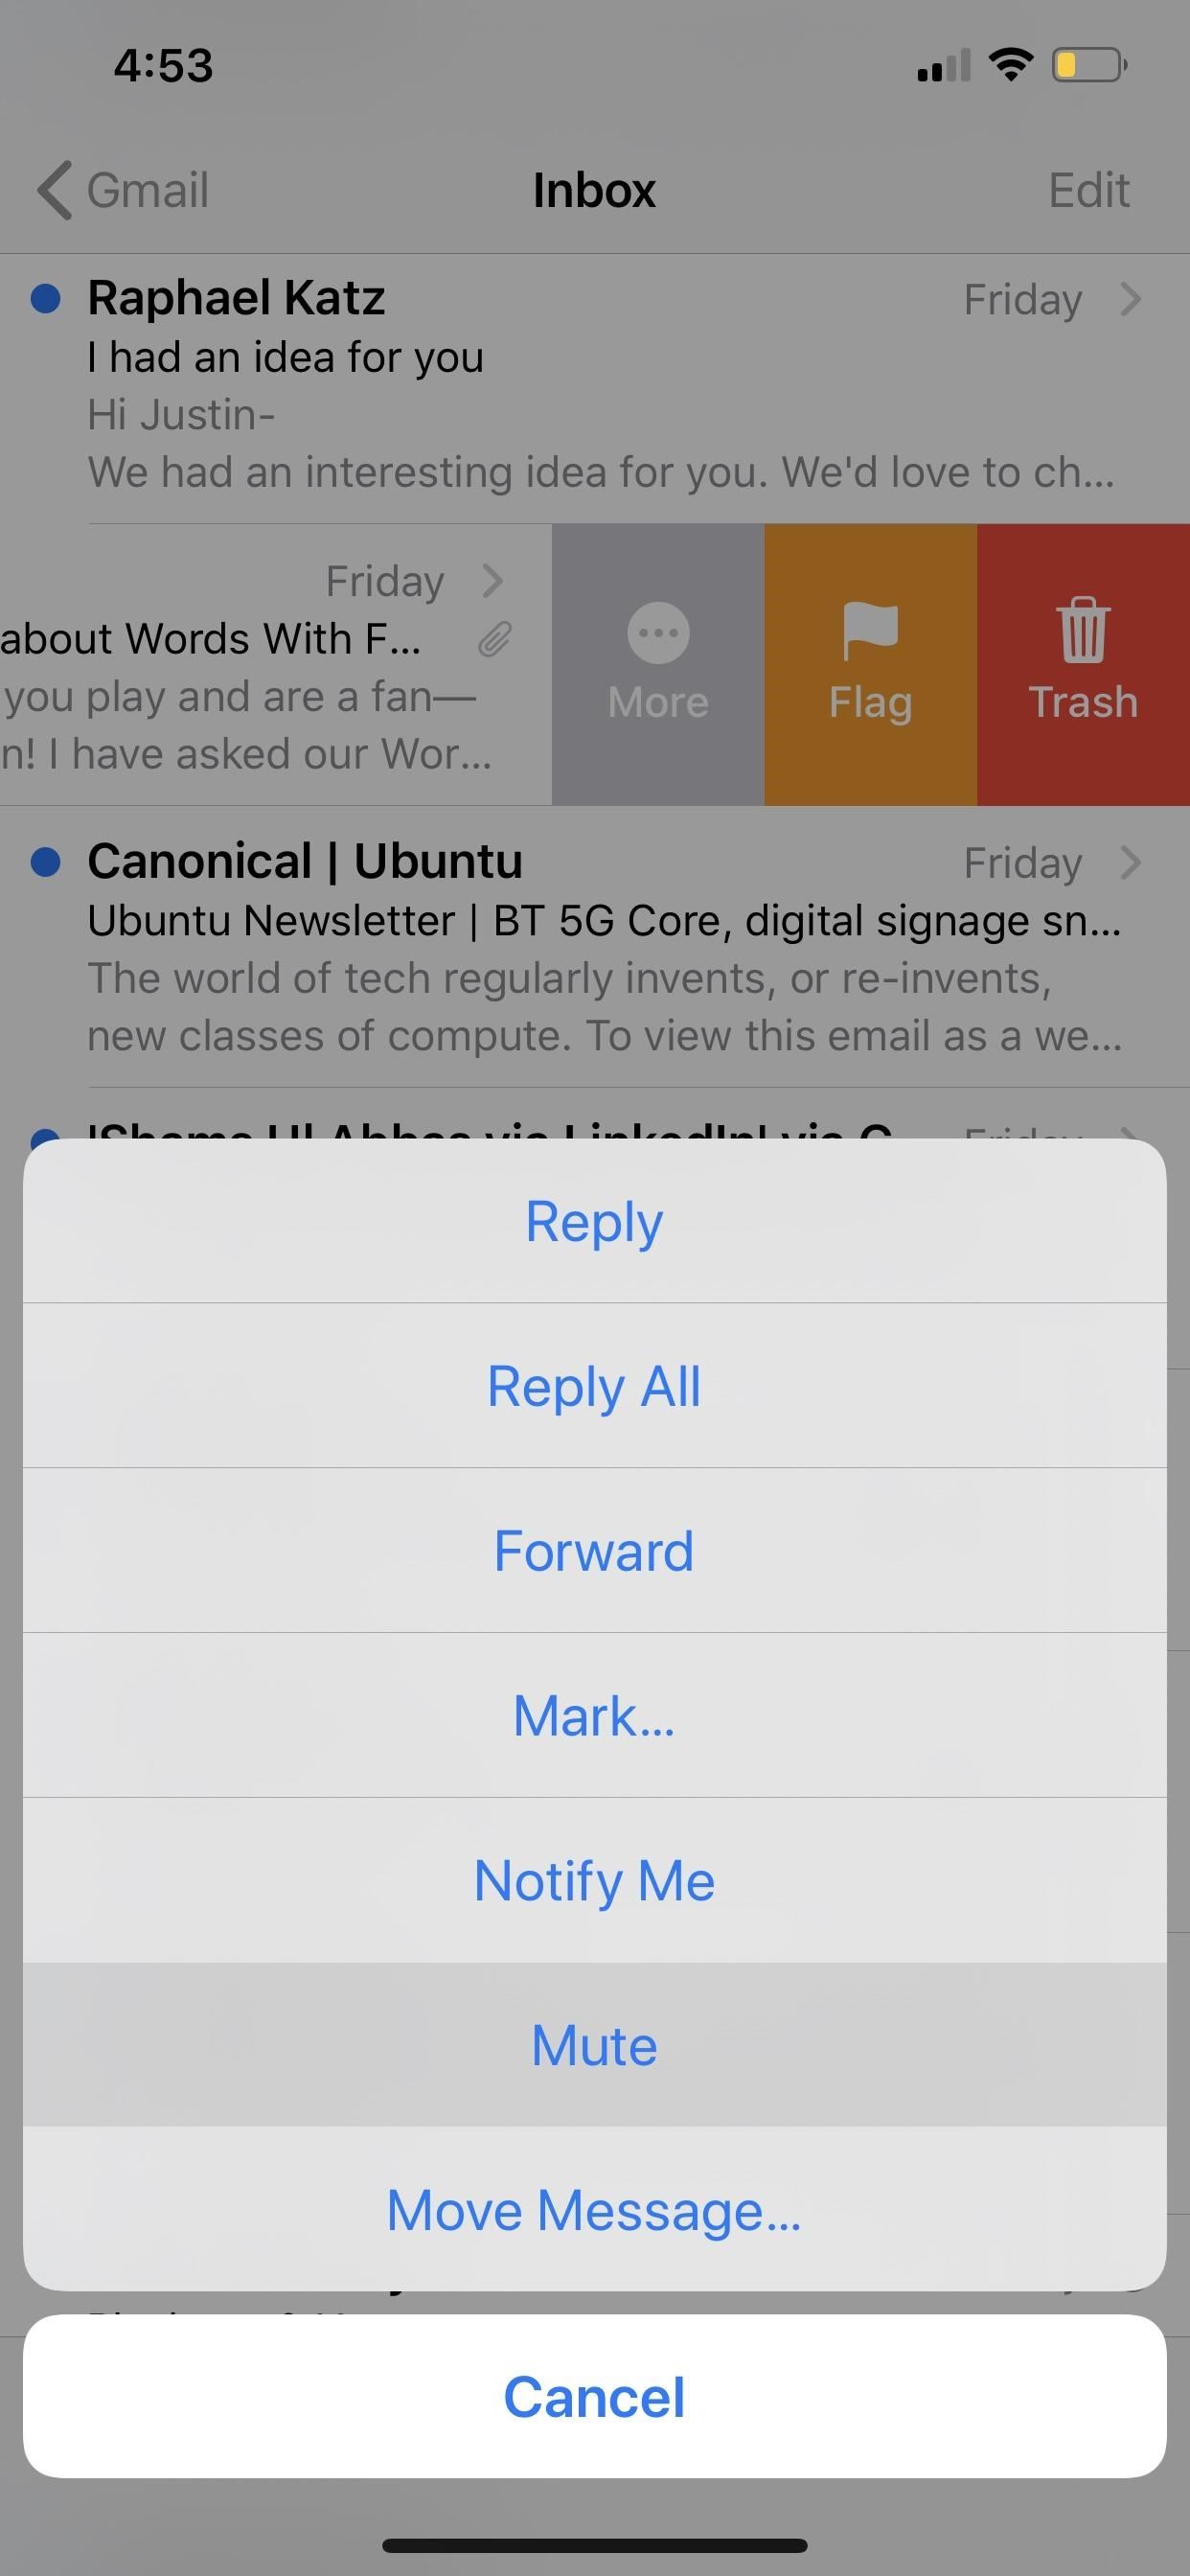 How to Mute Email Conversation Threads in iOS 13's Mail App to Stop Annoying Notifications